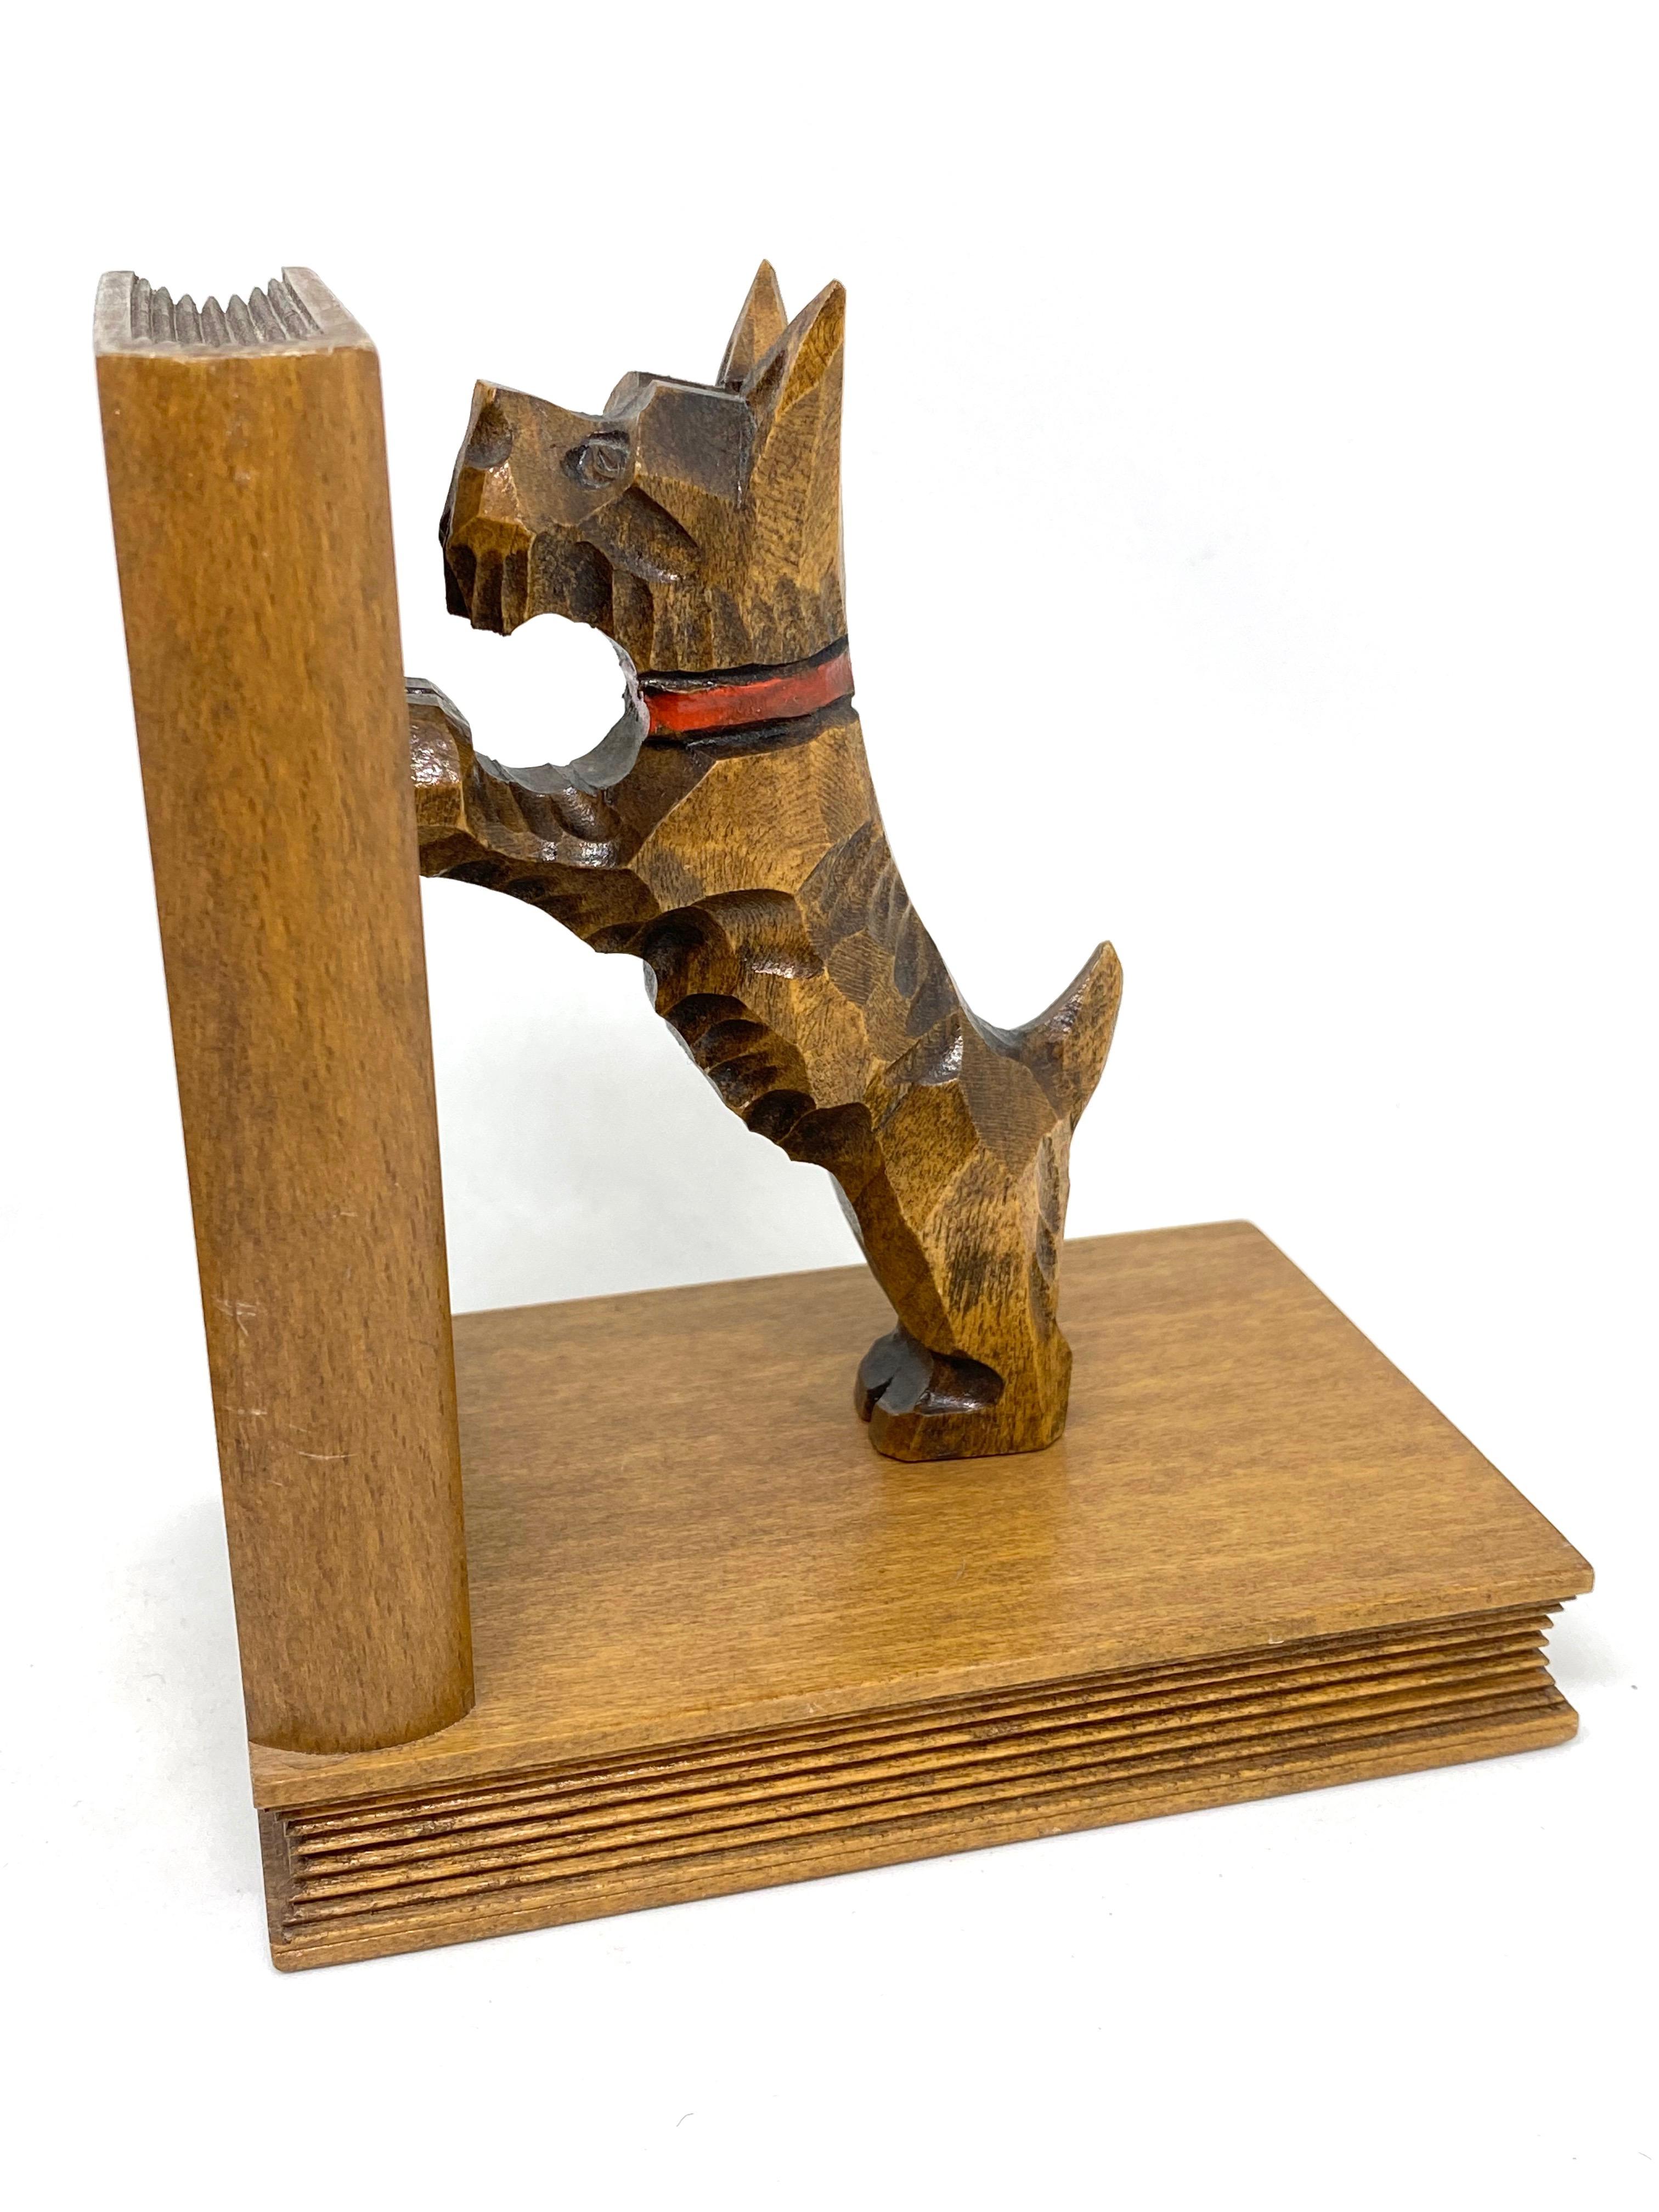 Classic 1950s Black Forest wood carved scotty dog bookends. Nice addition to your room or just for use on your shelf. Found at an estate sale in Nuremberg, Germany.